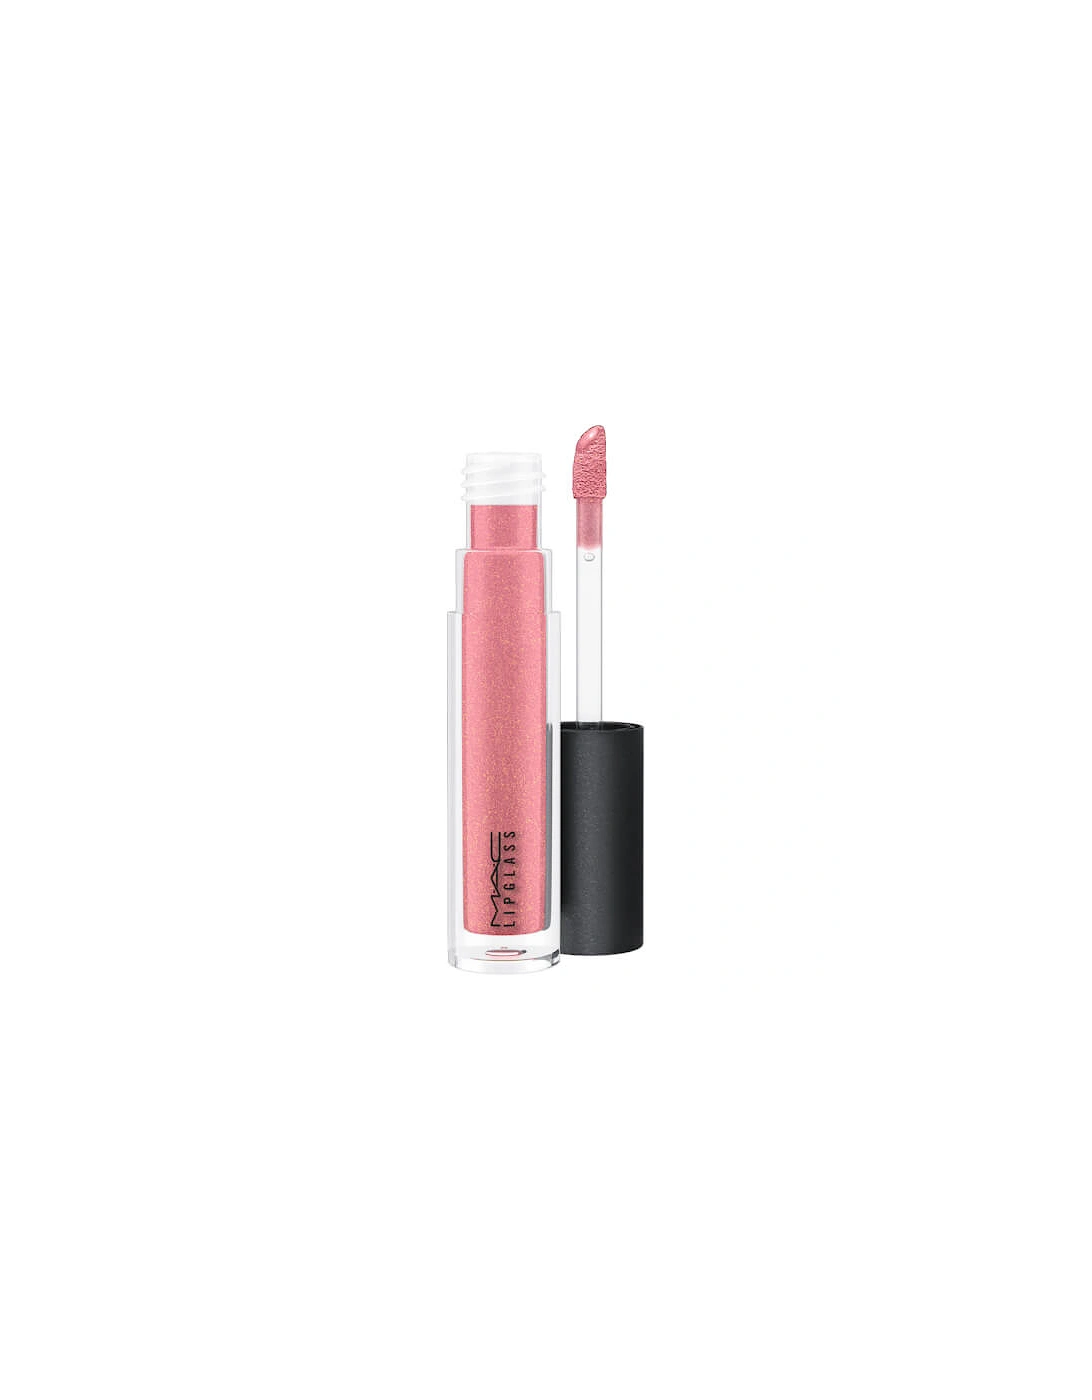 Lipglass Lipgloss - All Things Magical, 2 of 1